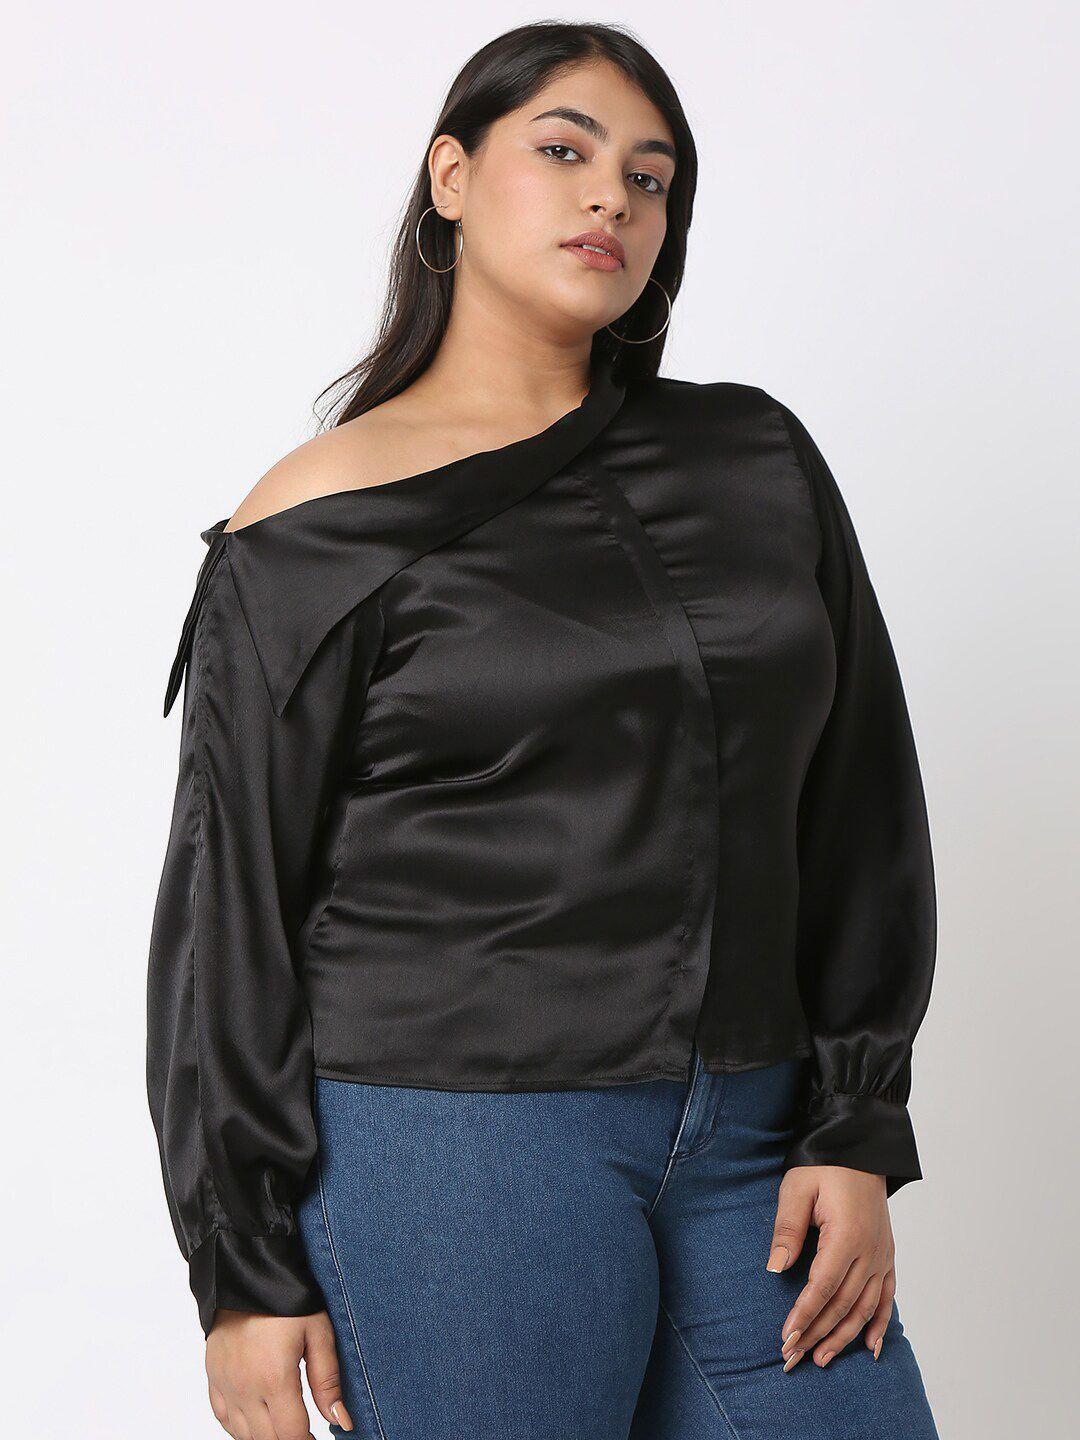 curves by mish off-shoulder cuffed sleeves bardot top